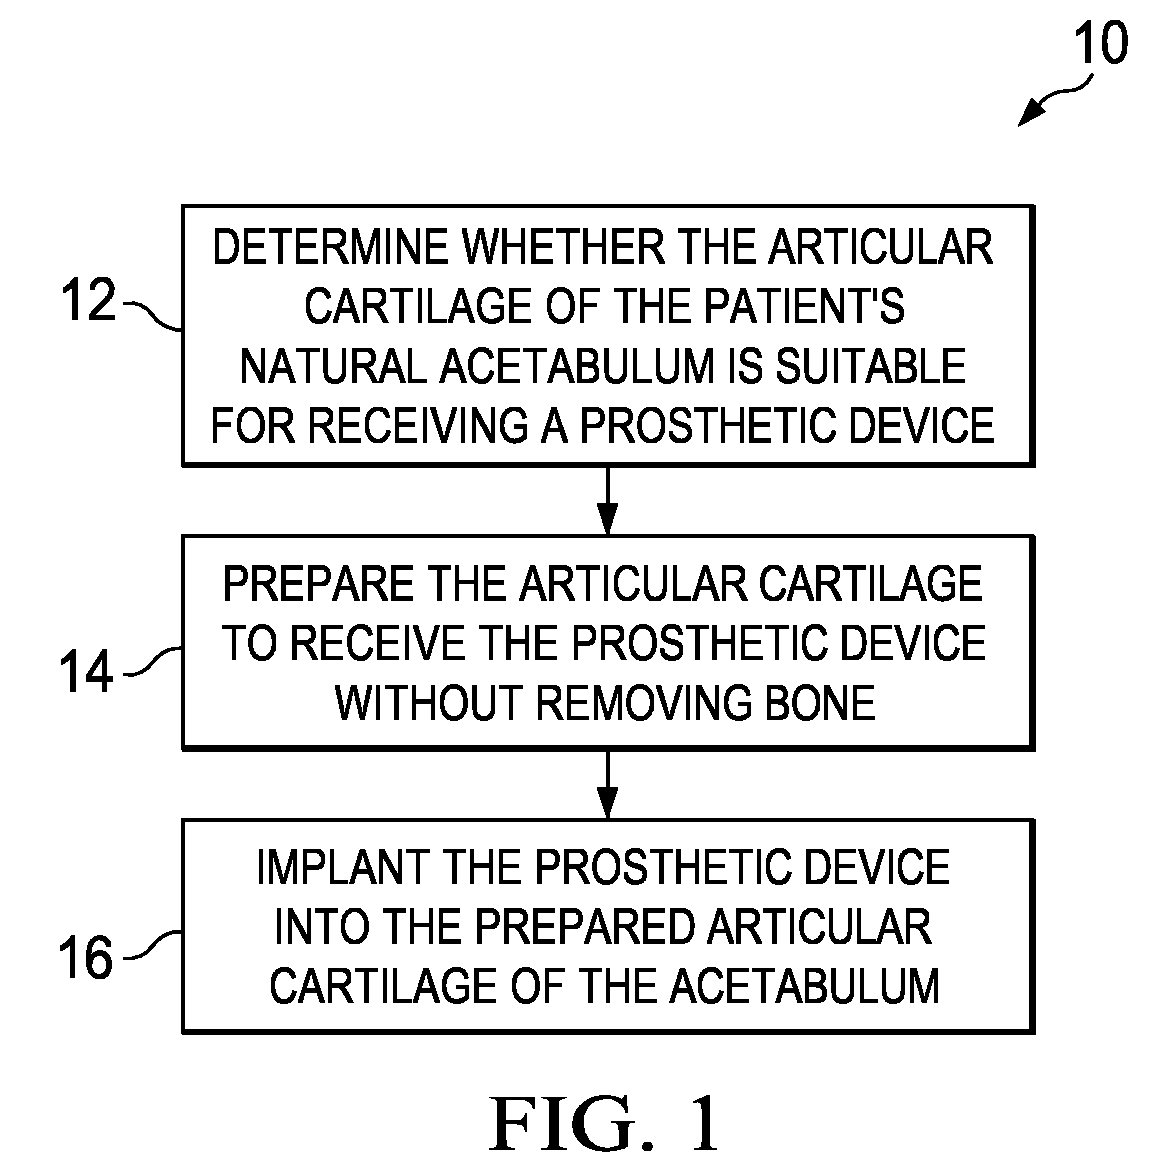 Methods, Systems, and Apparatus for Implanting Prosthetic Devices Into Cartilage